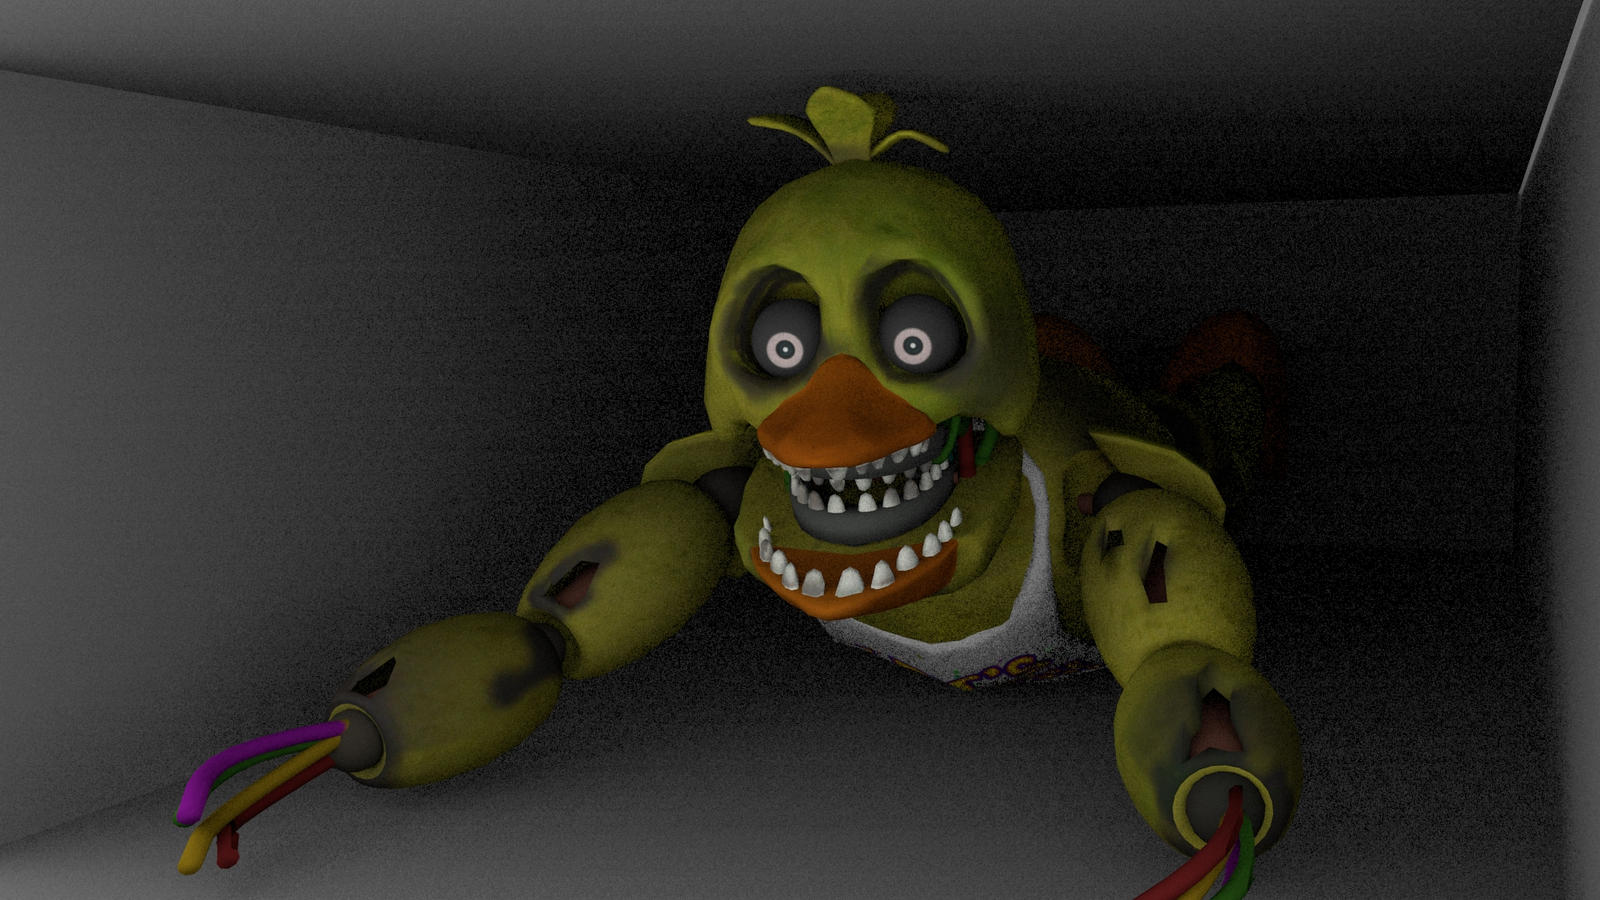 withered chica in vent｜TikTok Search